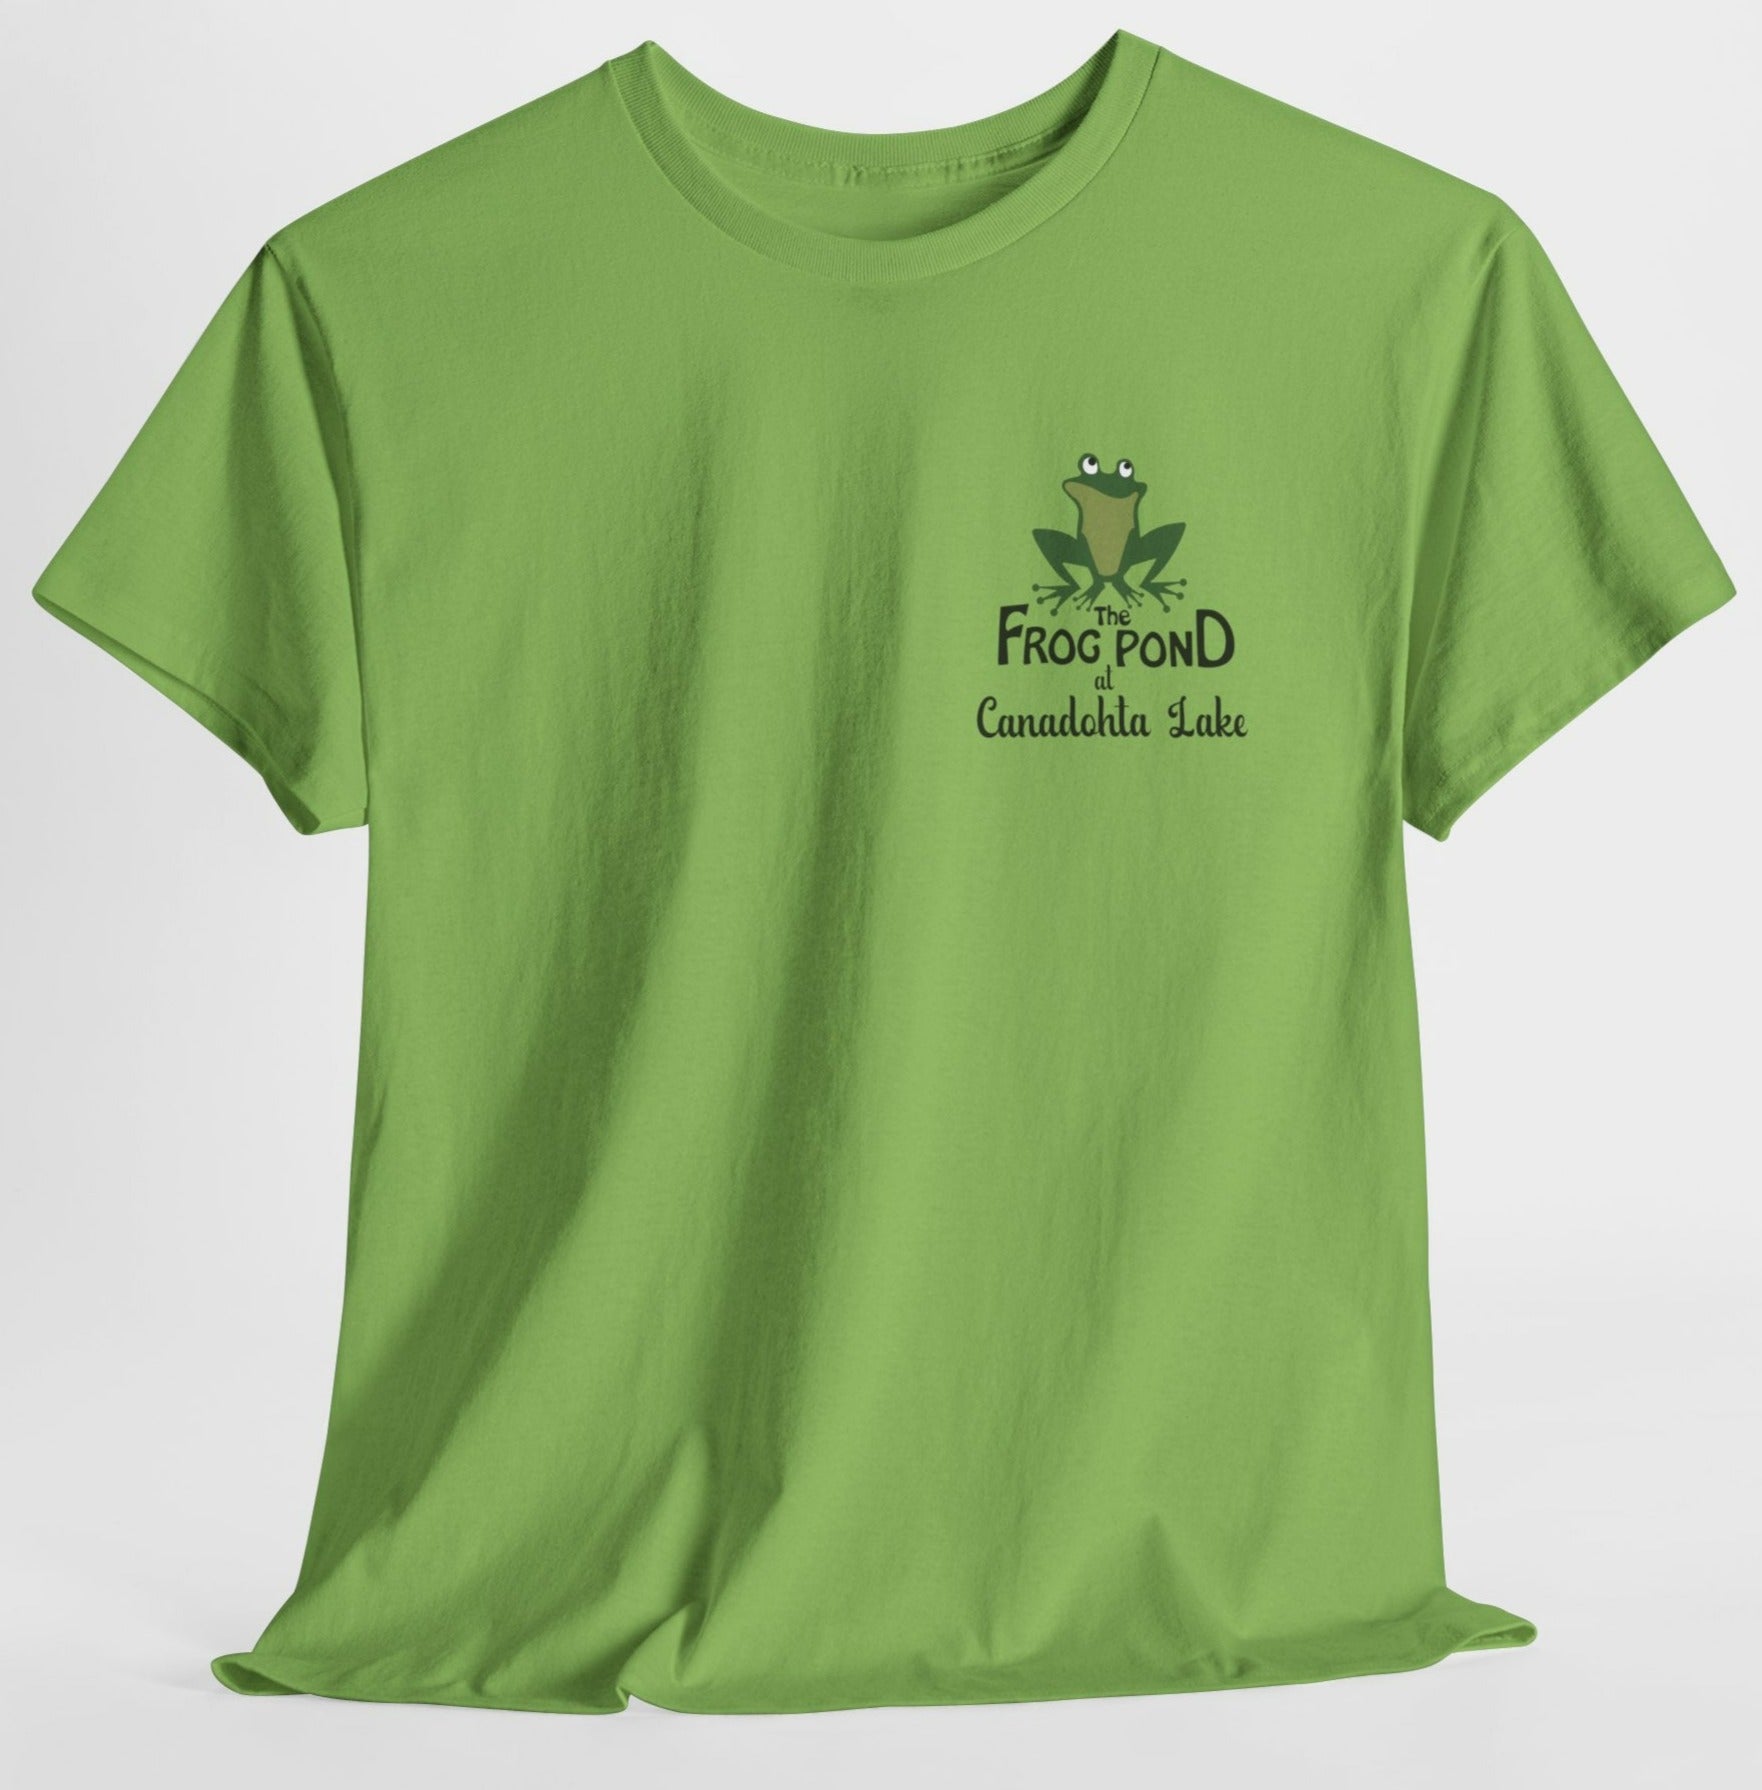 Canadohta Lake Signature Frog Pond Tshirt in Lime Green